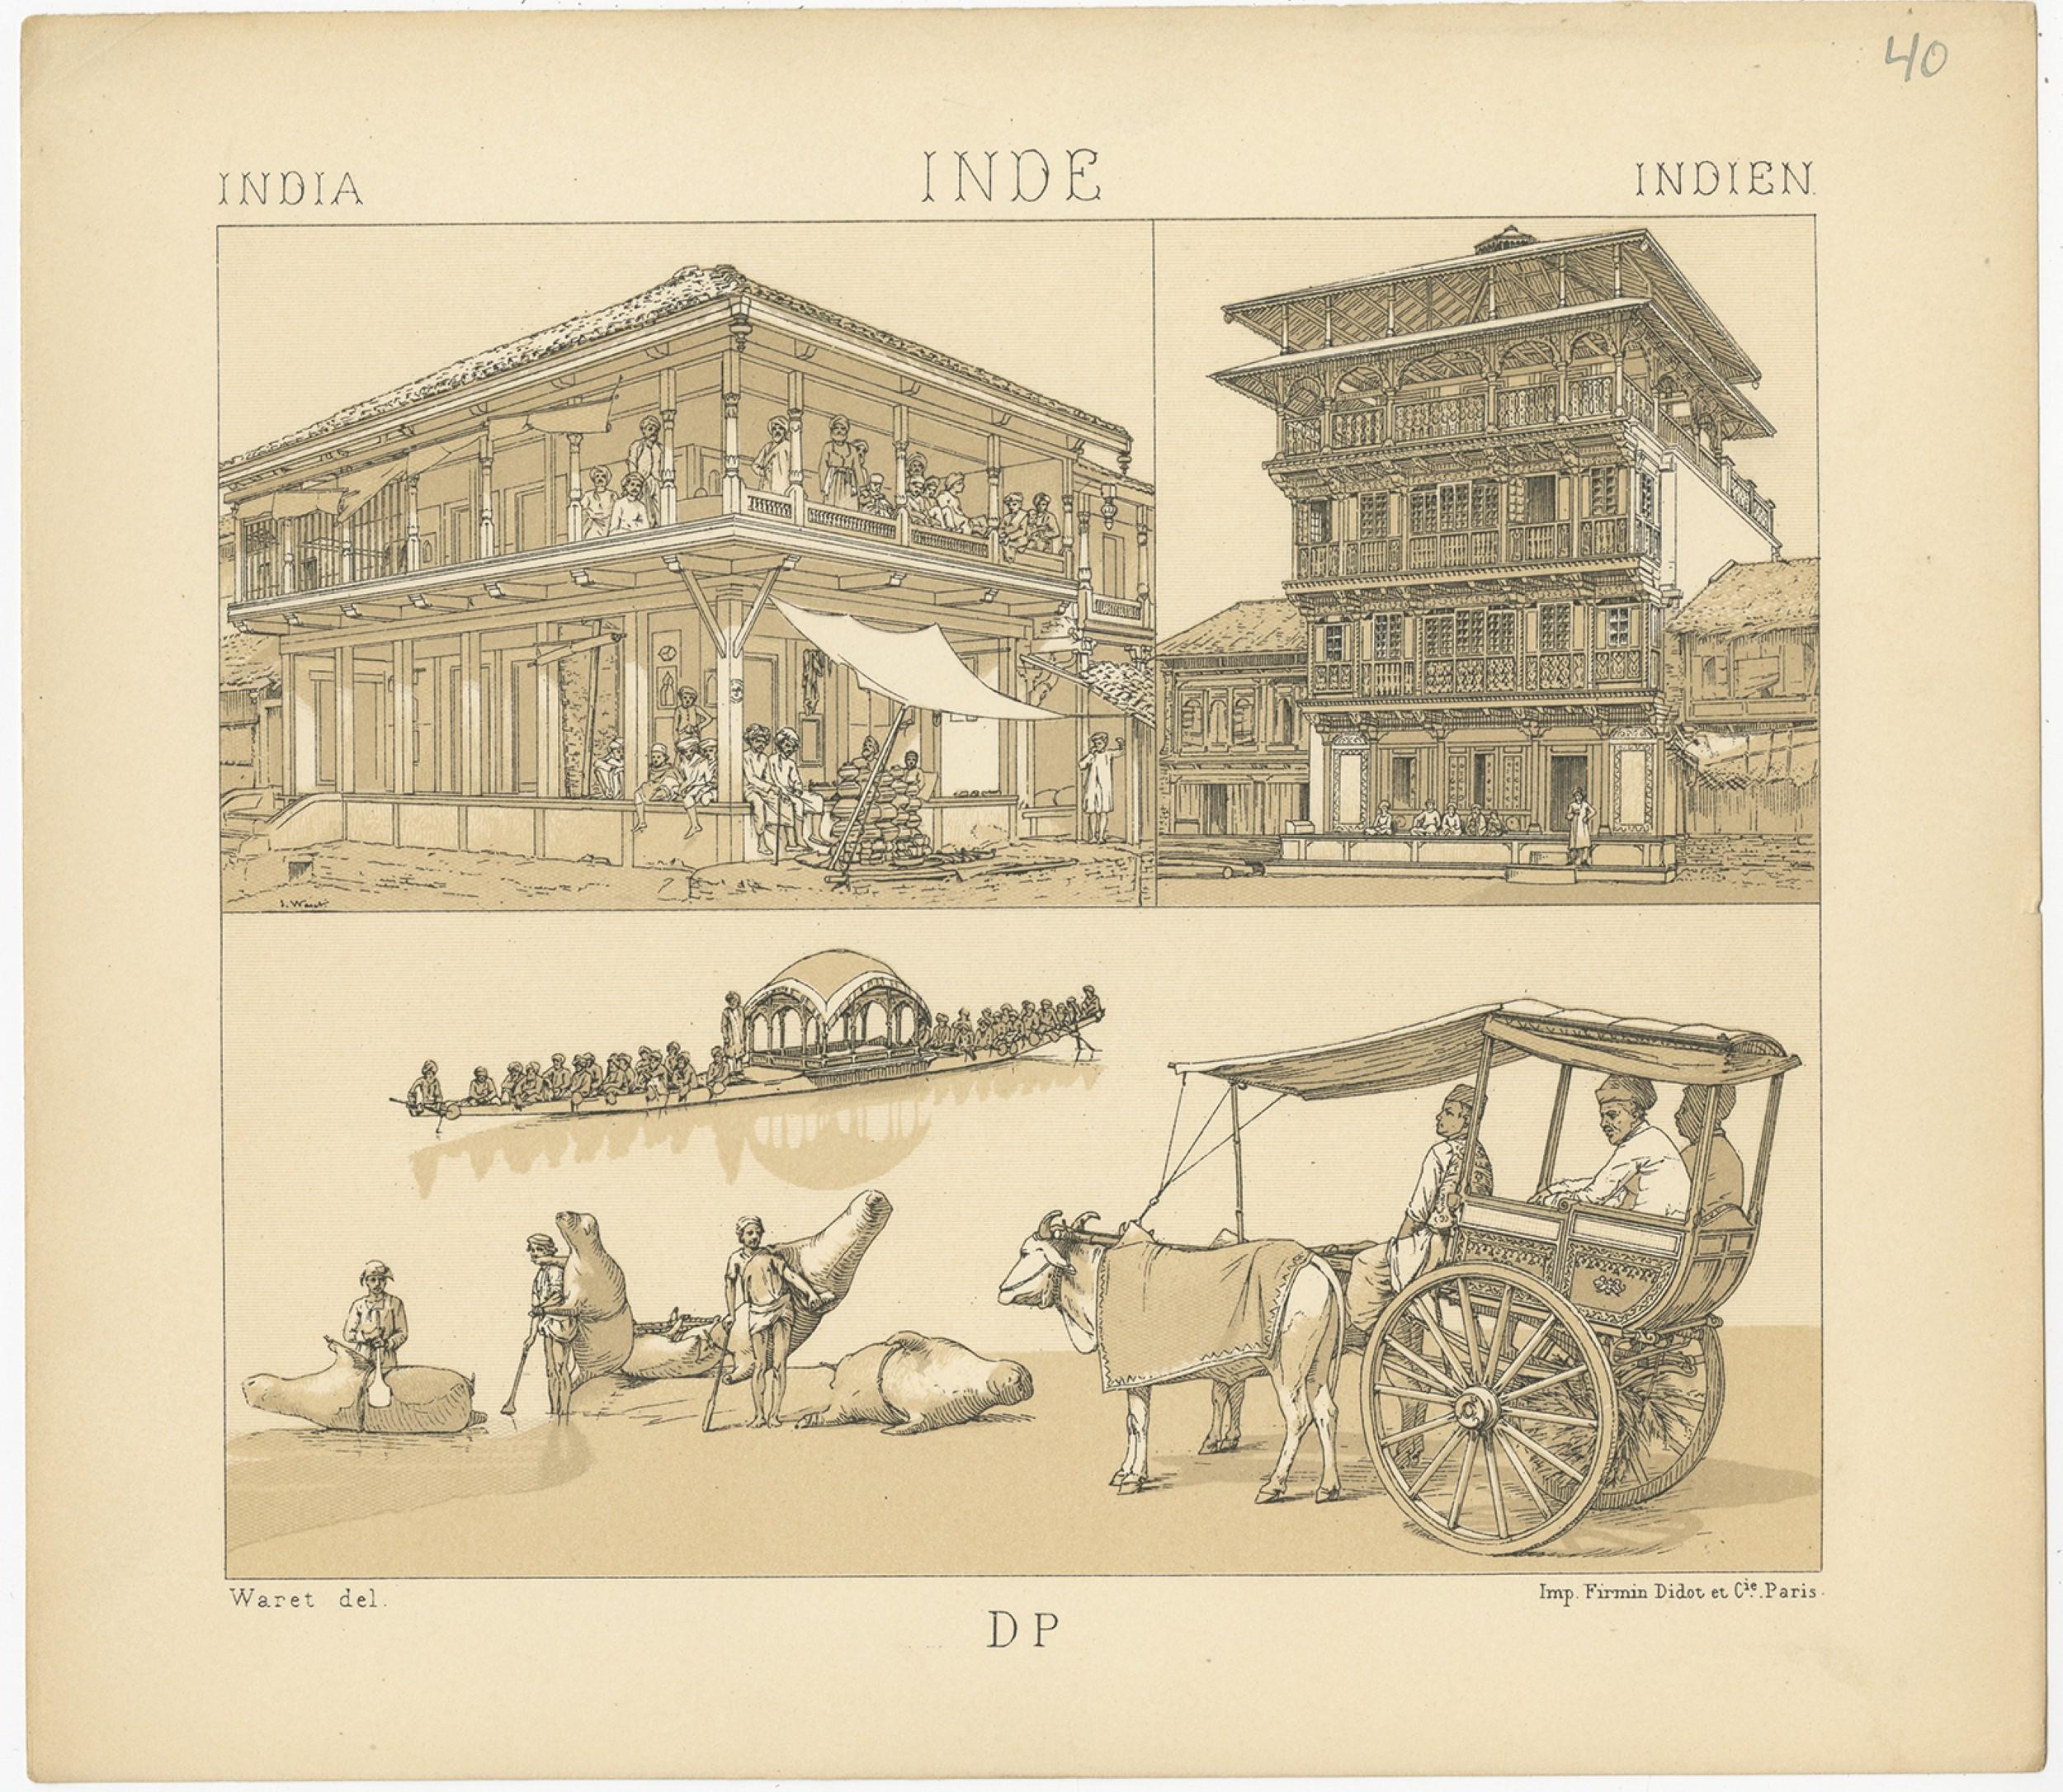 Antique print titled 'India - Inde - Indien'. Chromolithograph of Indian Scenes. This print originates from 'Le Costume Historique' by M.A. Racinet. Published, circa 1880.